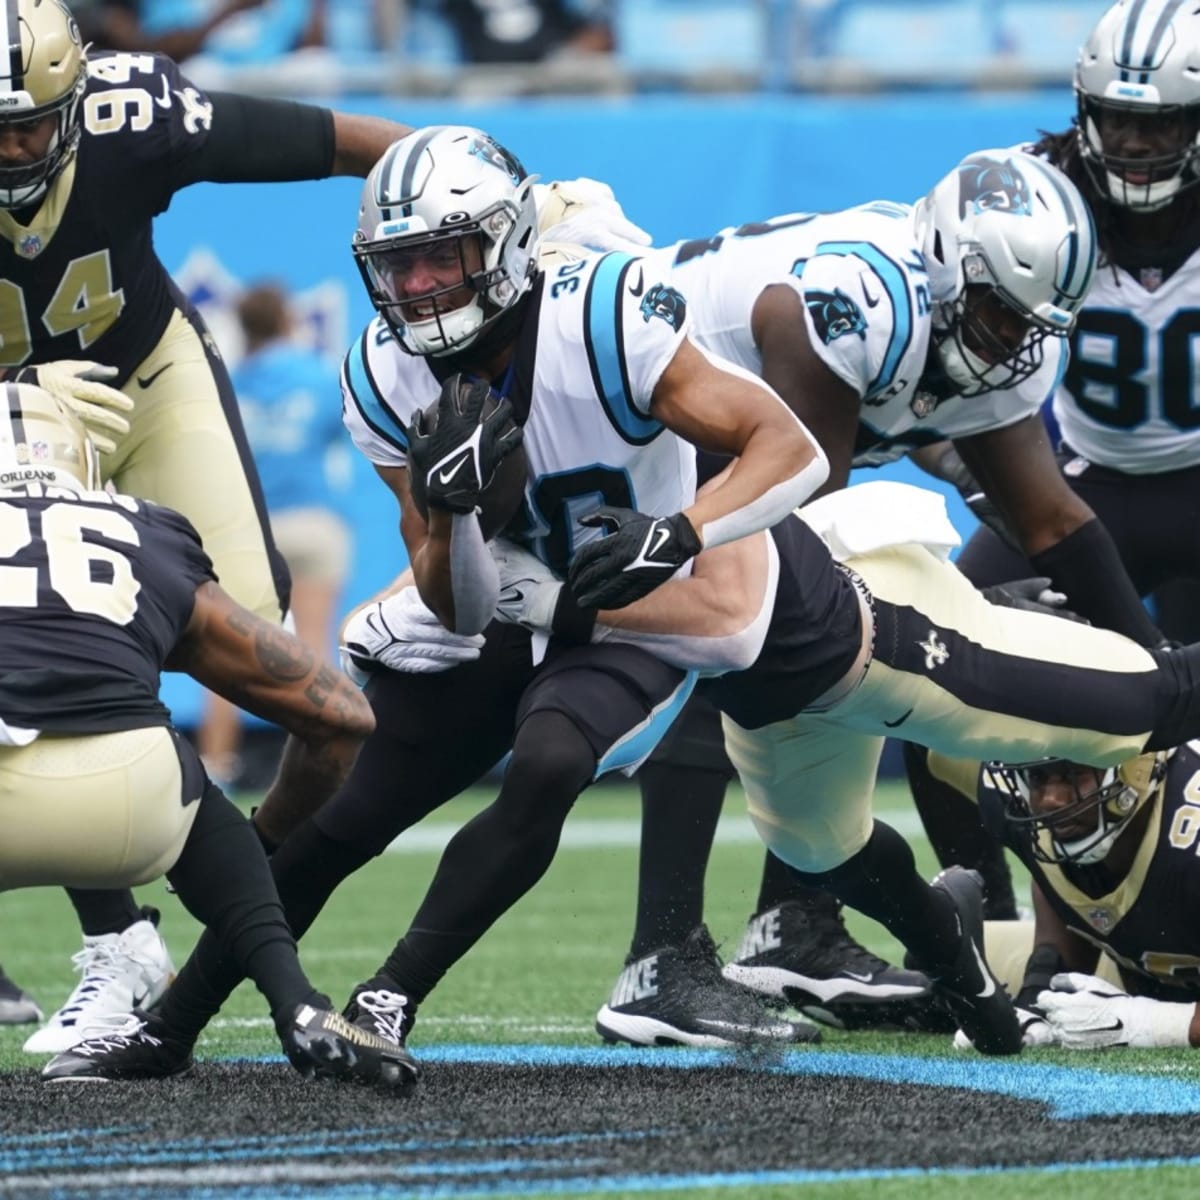 Rapid Reactions: Defense solid, offense uneven in loss to Saints